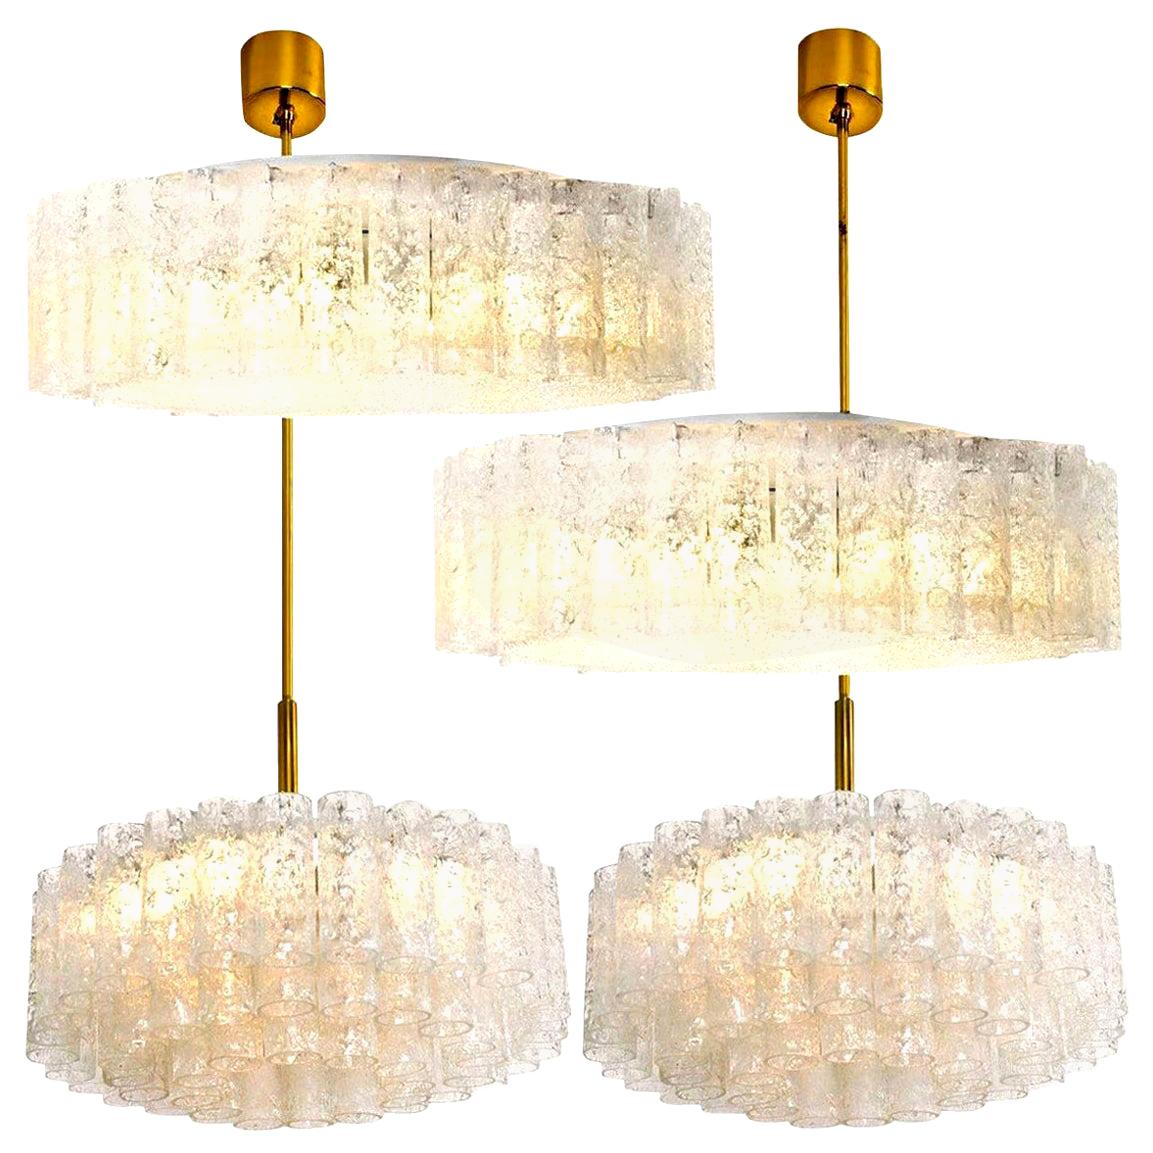 Set of Four Glass Brass Light Fixtures by Doria, Germany, 1960s